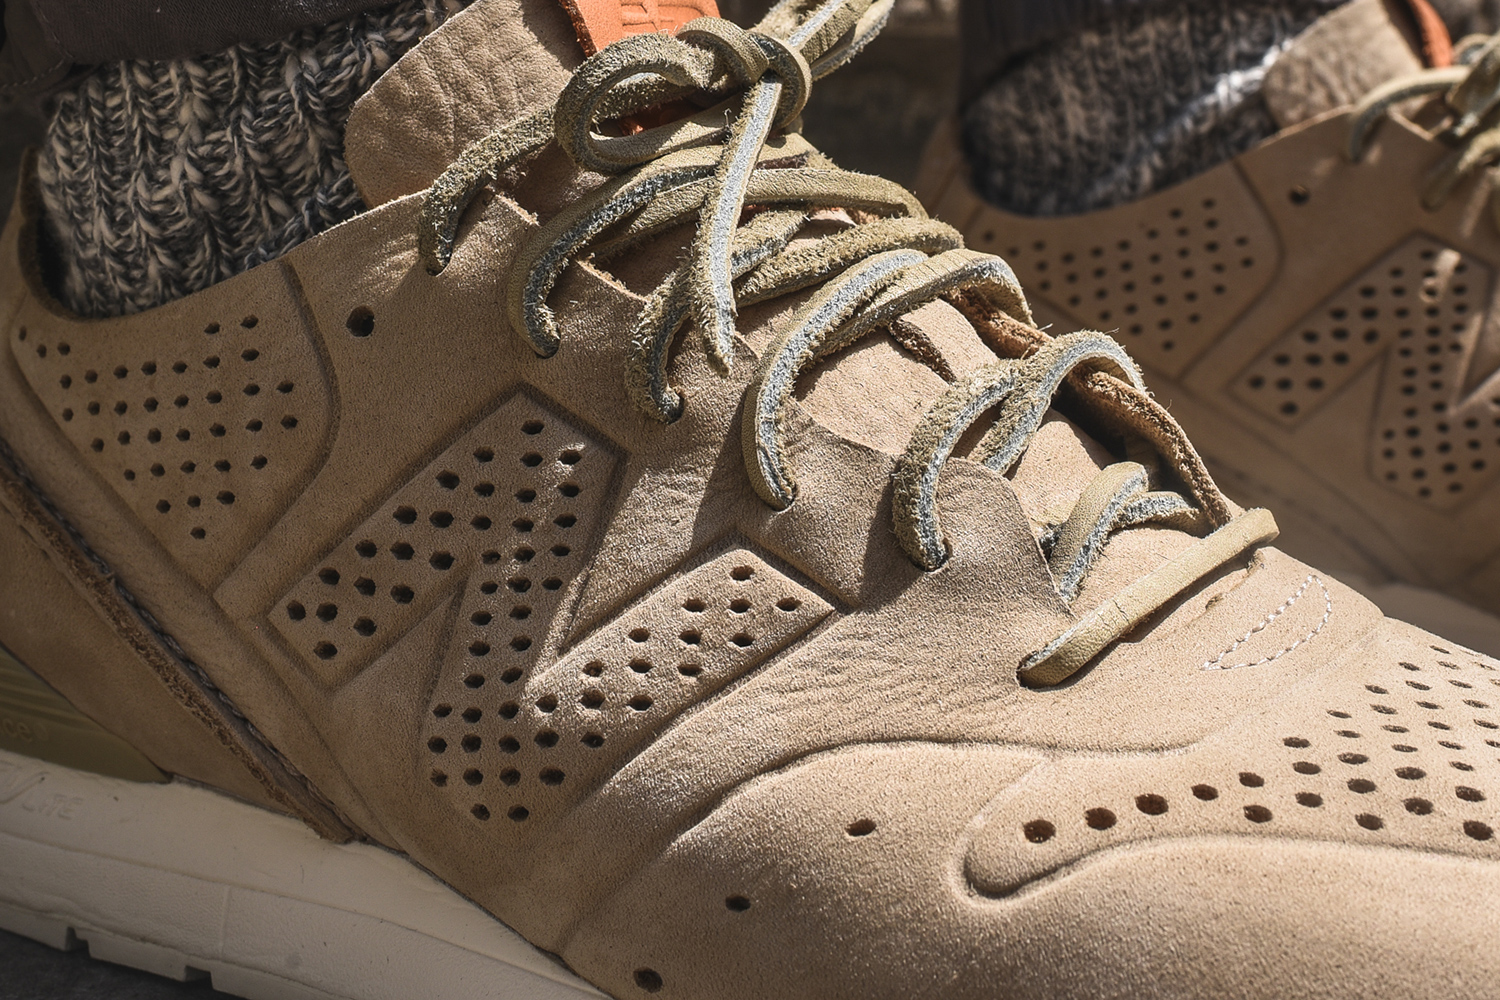 kith-new-balance-deconstructed-mrl696-re-release-04